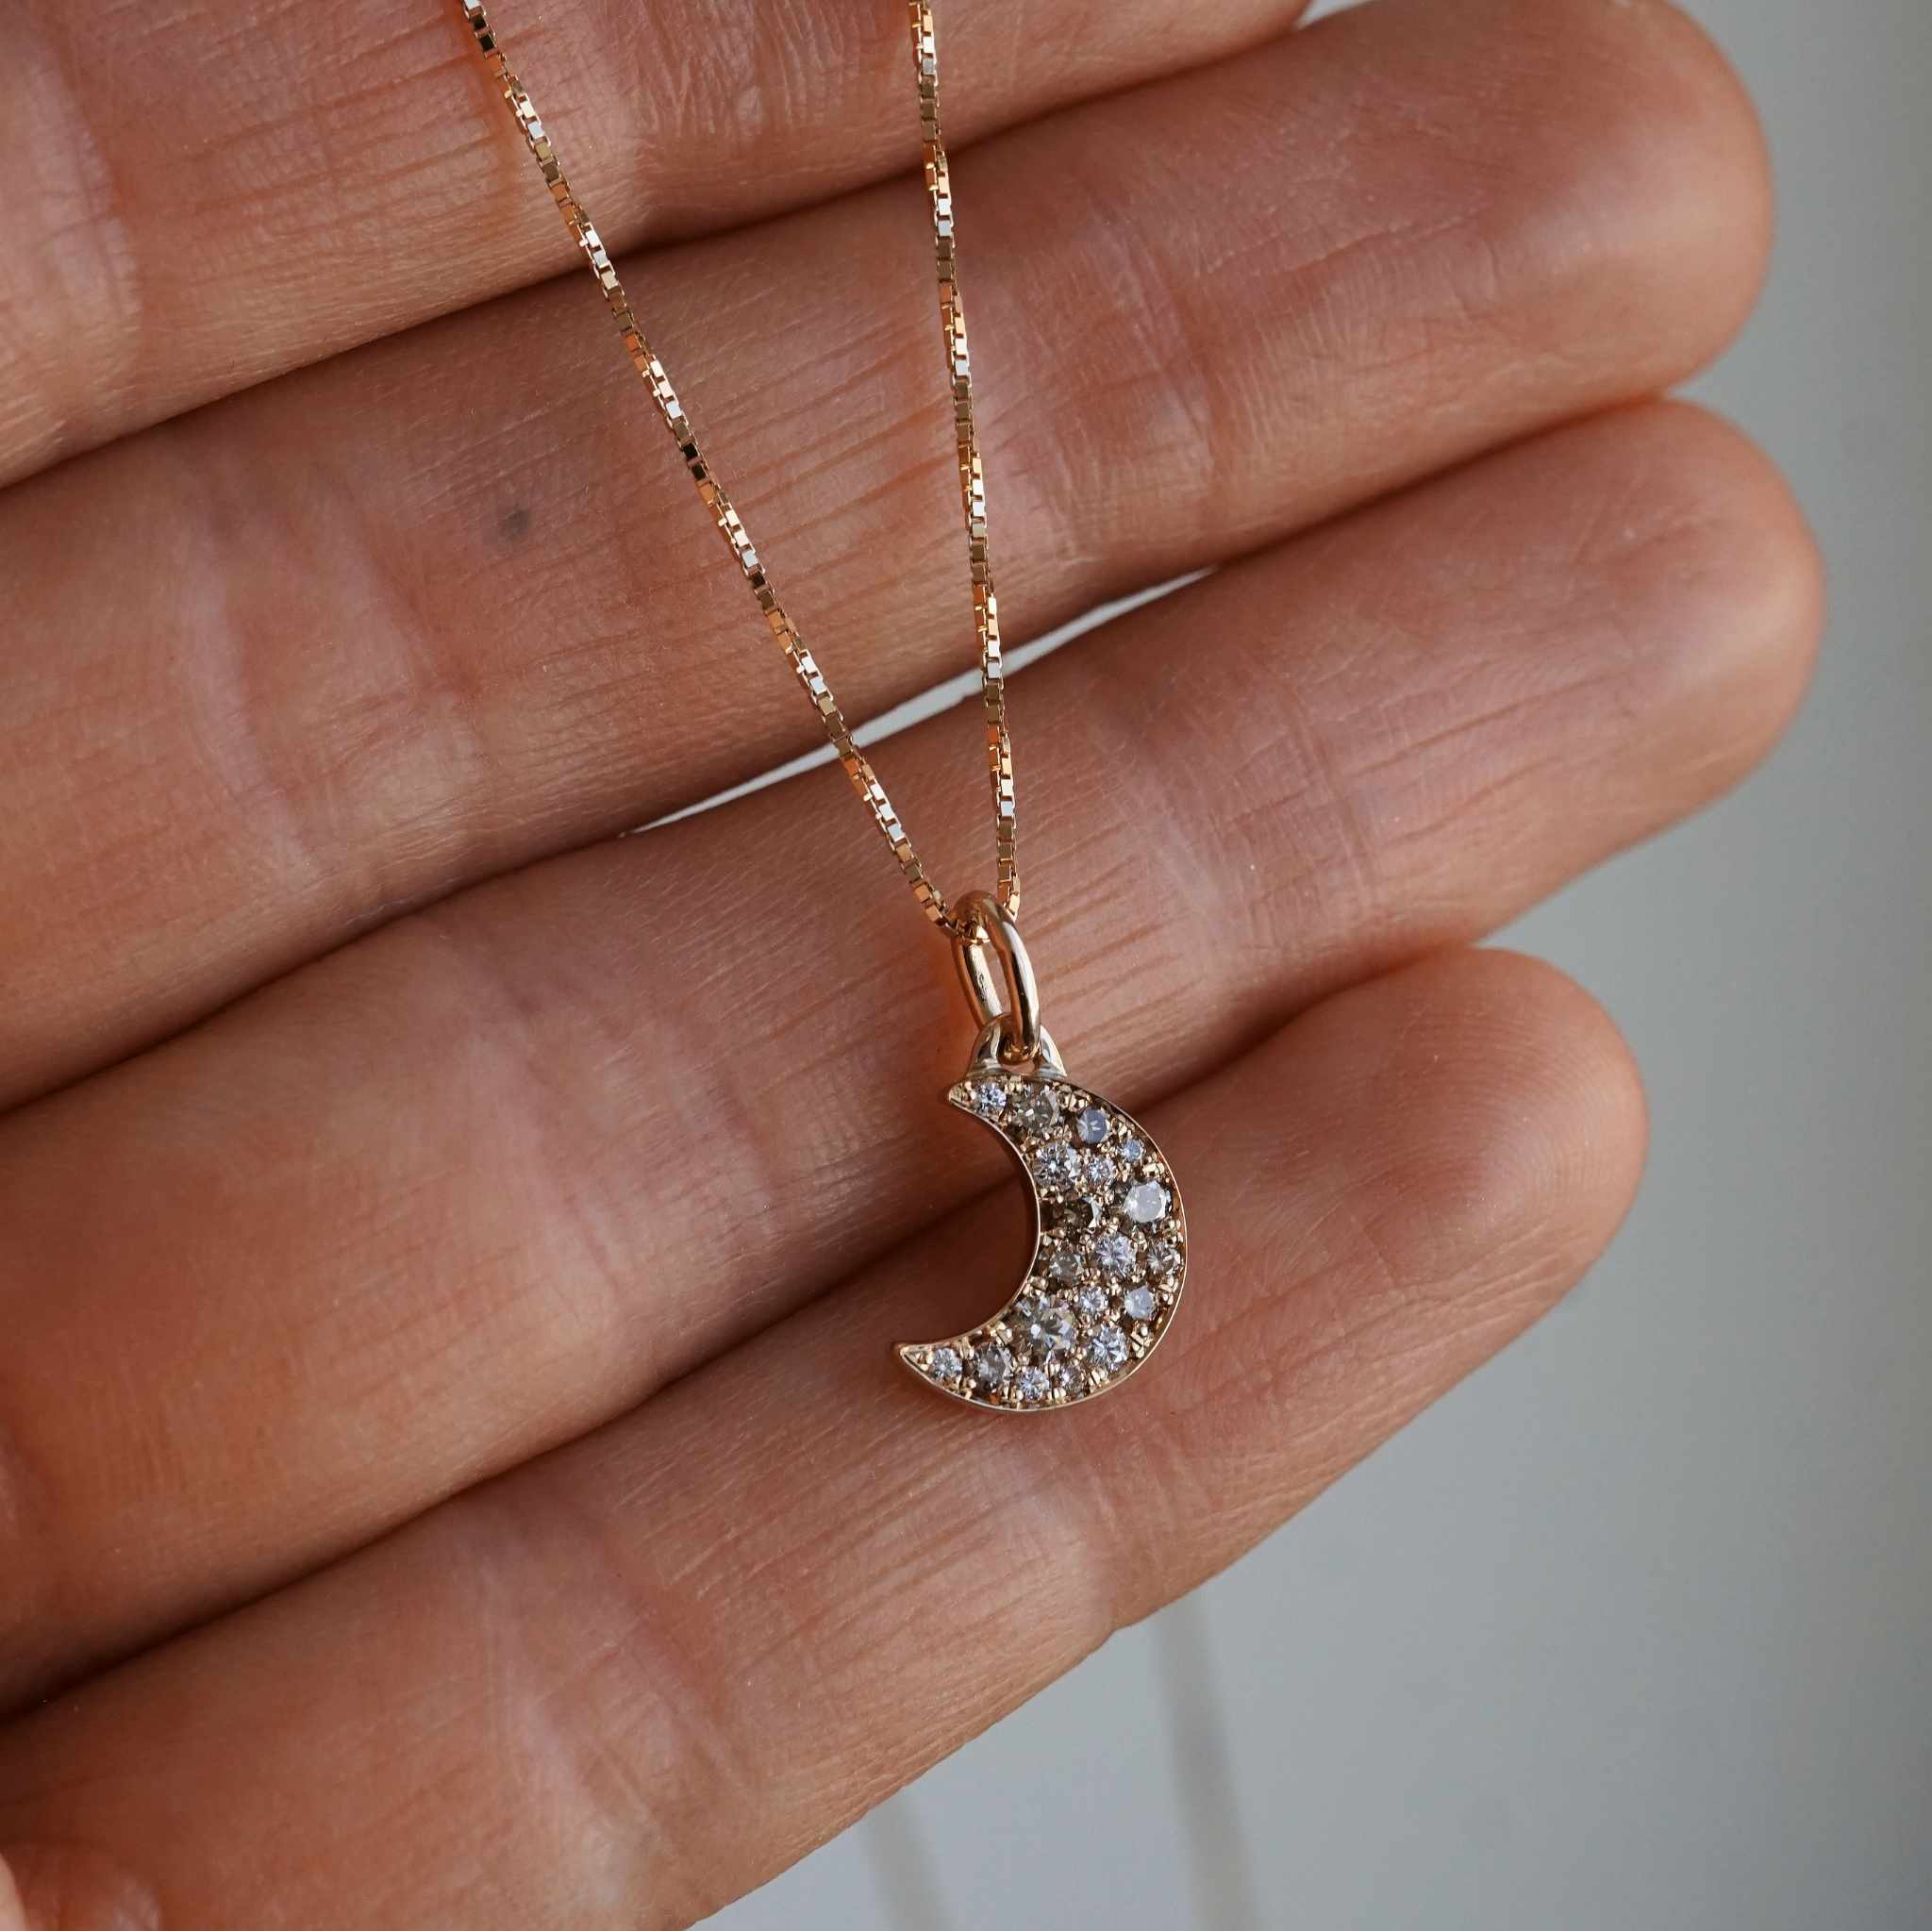 "Pavé sparkle Moon" pendant in 18K gold with mixed diamonds